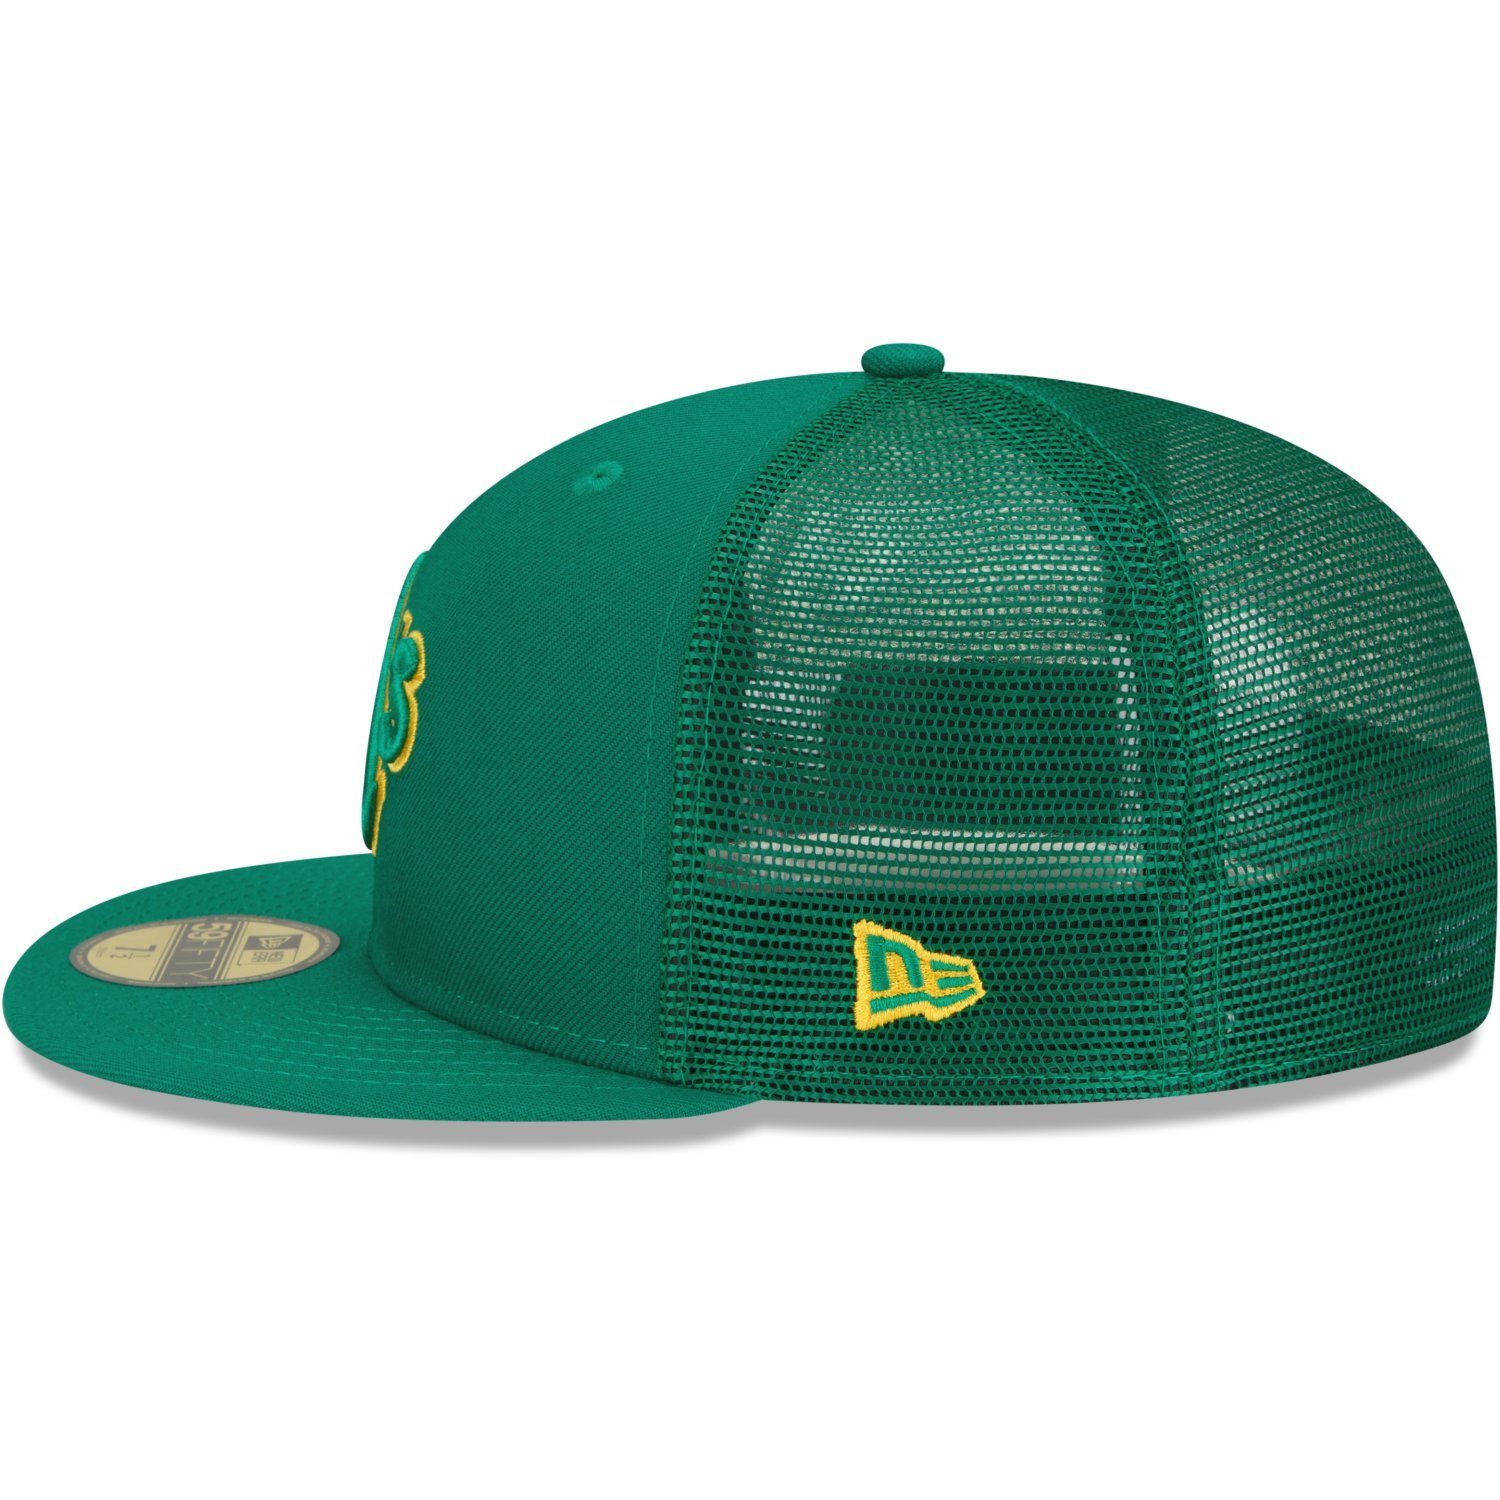 59Fifty Fitted Cap Era New BATTING Oakland Athletics PRACTICE